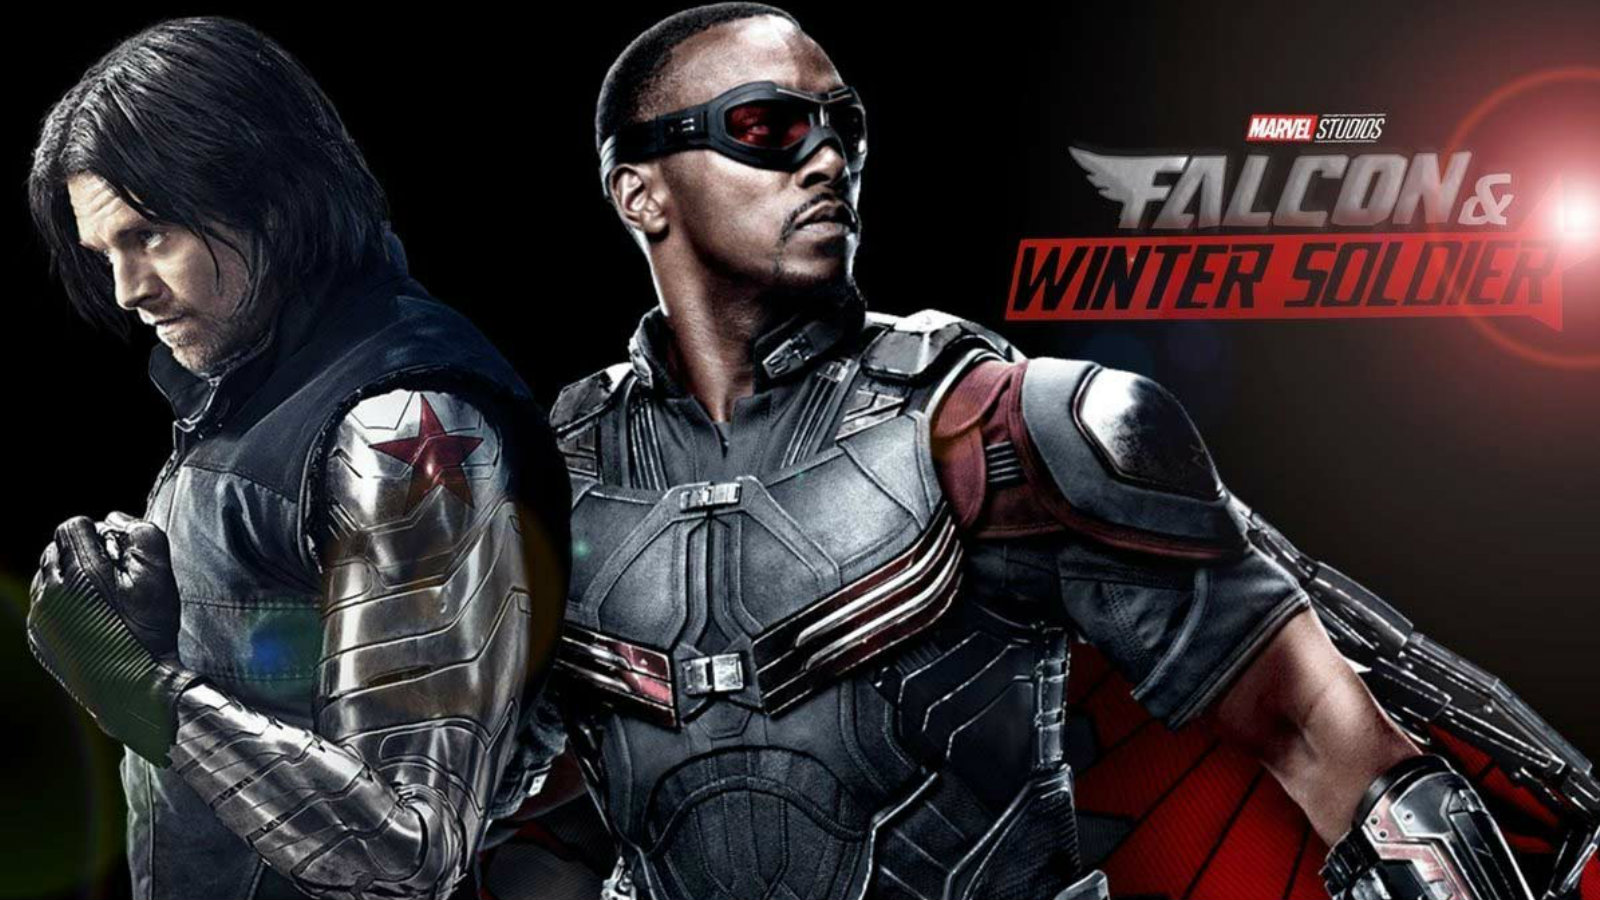 The ファルコン And The Winter Soldier The ファルコン And The Winter Soldier 壁紙 ファンポップ